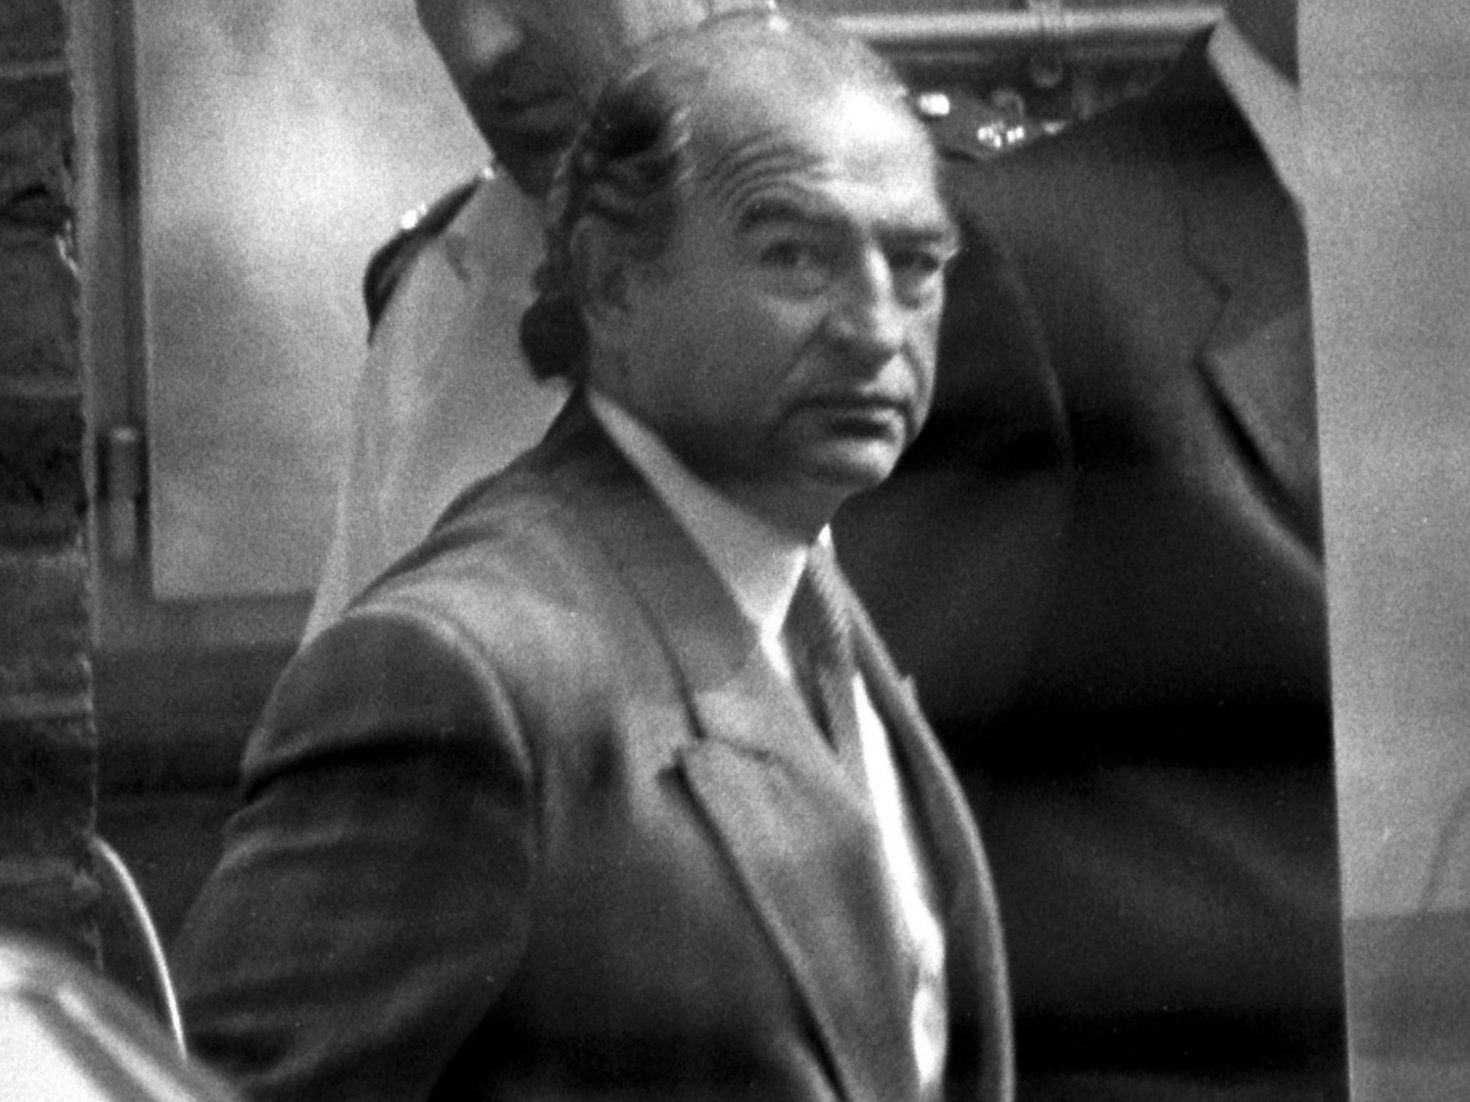 Foreman leaving Bow Street Magistrates Court after being remanded in 1983